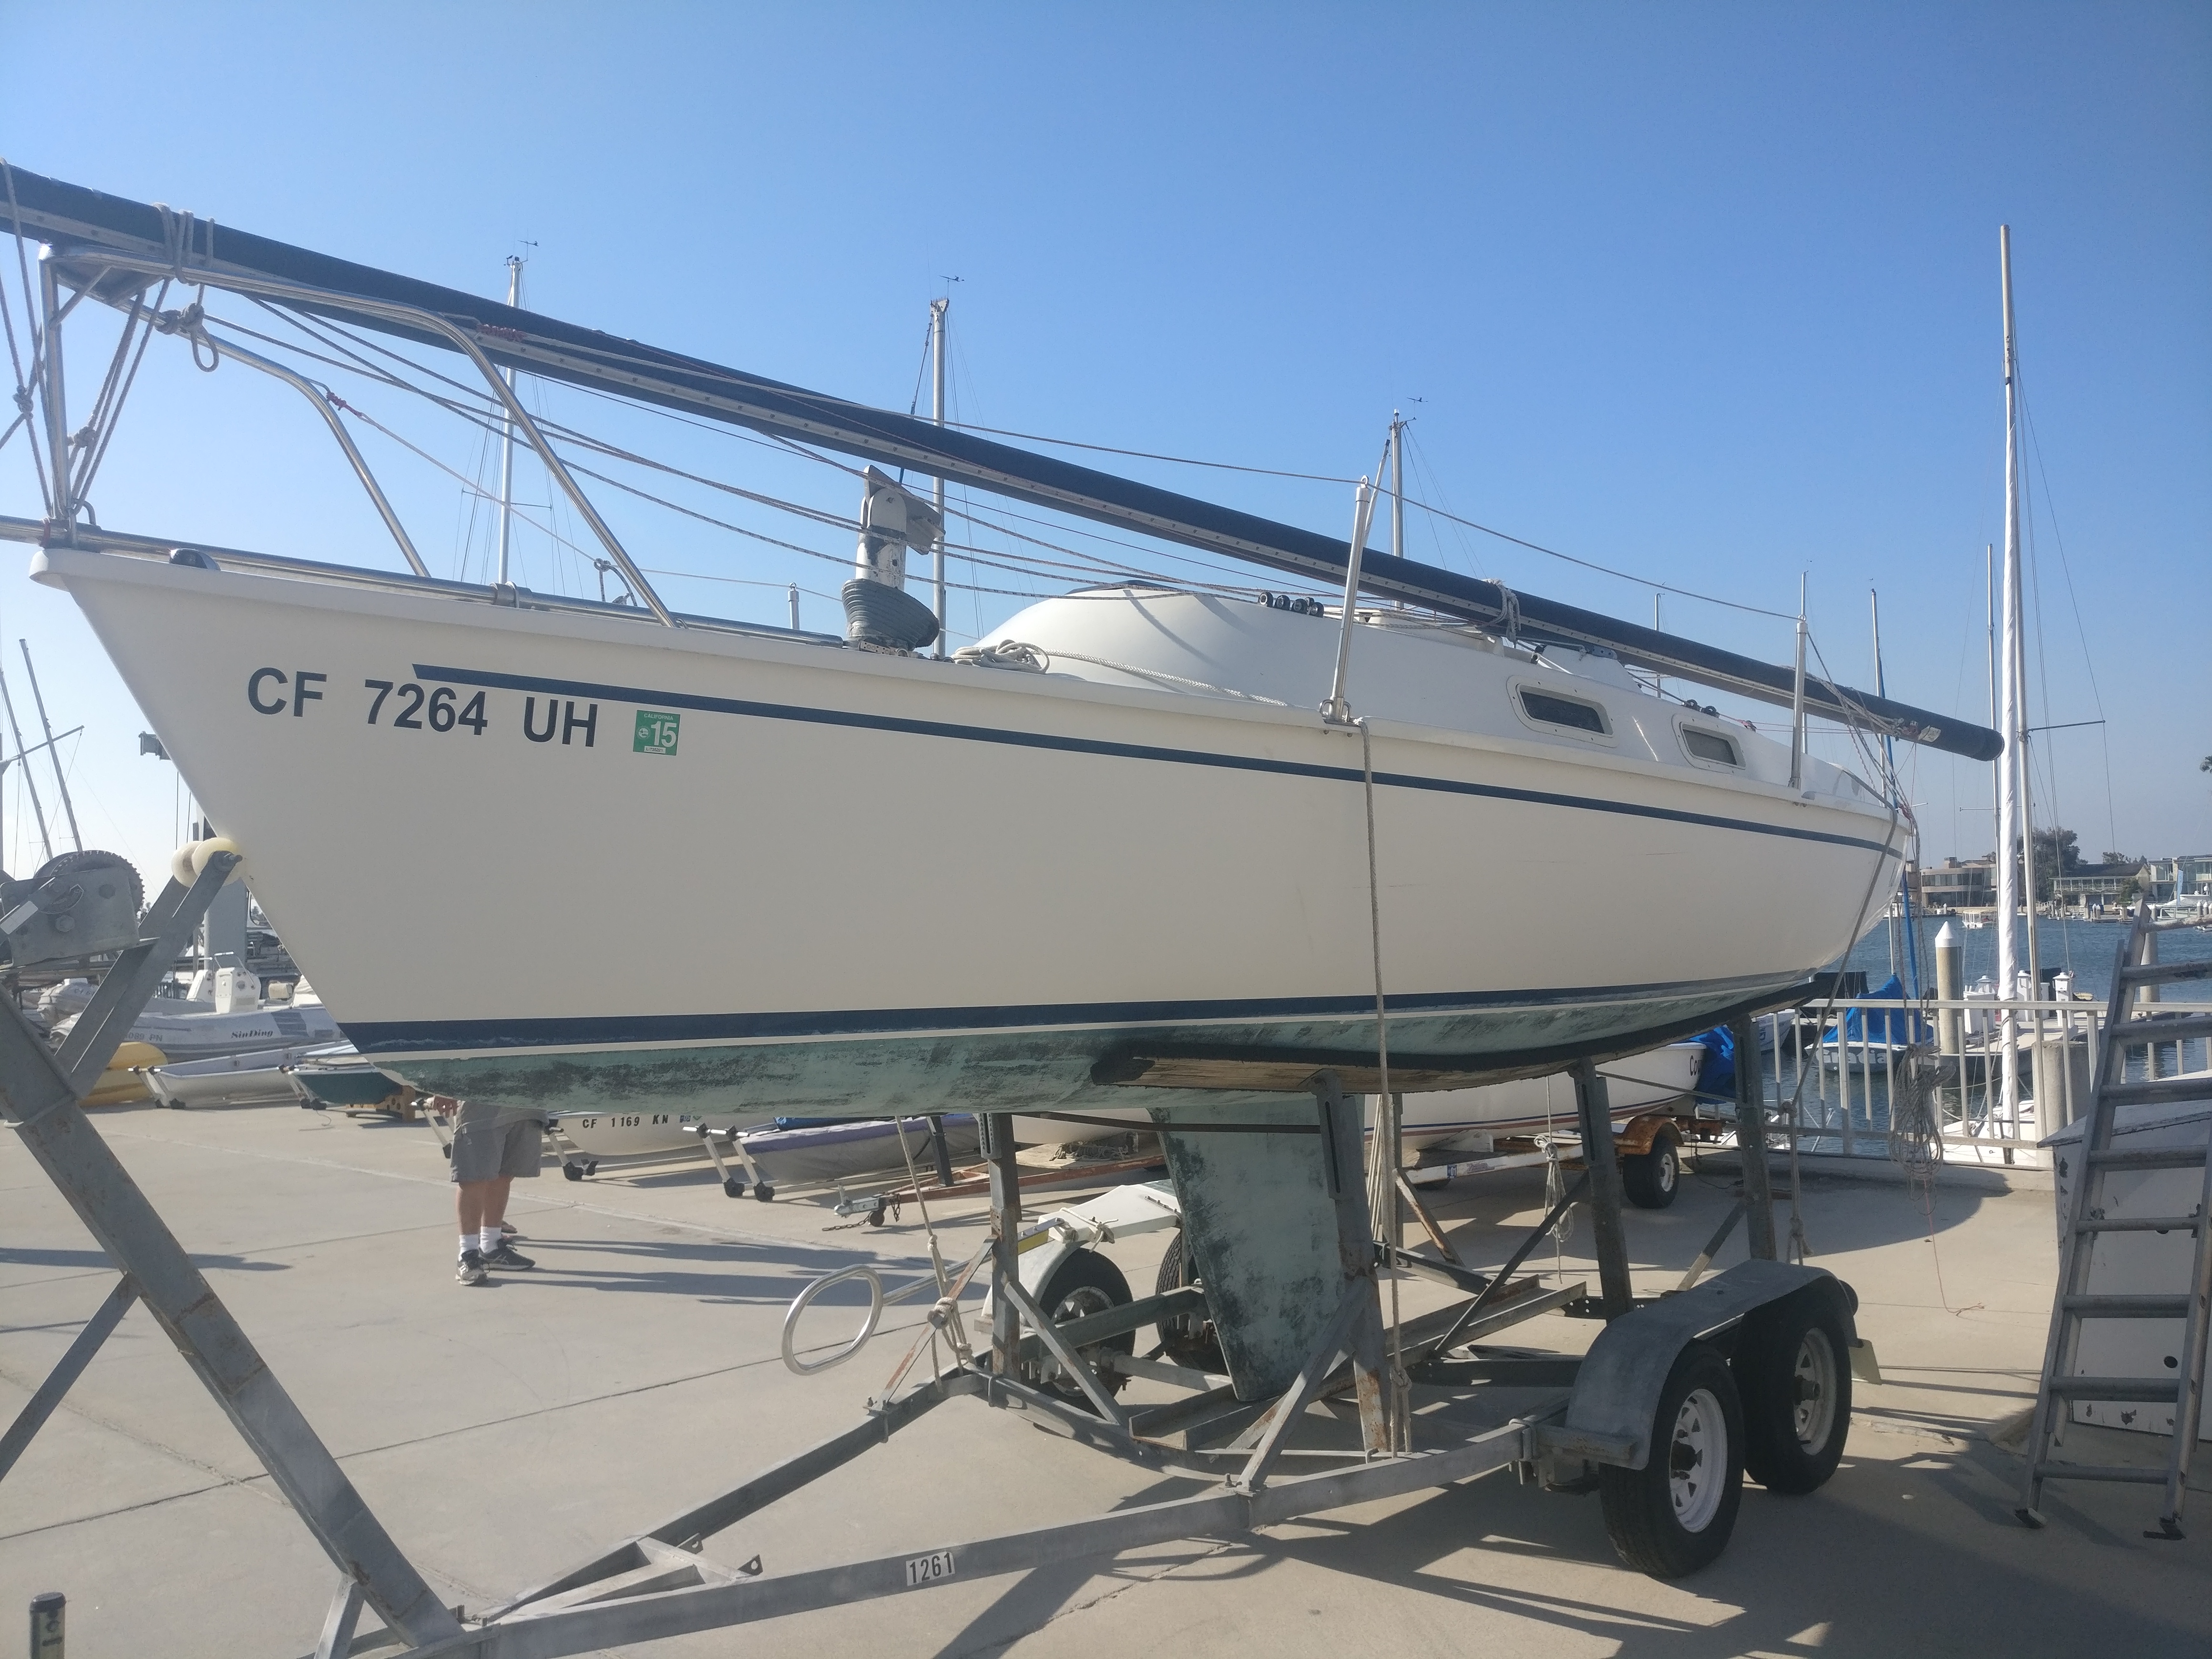 freedom 21 sailboat review